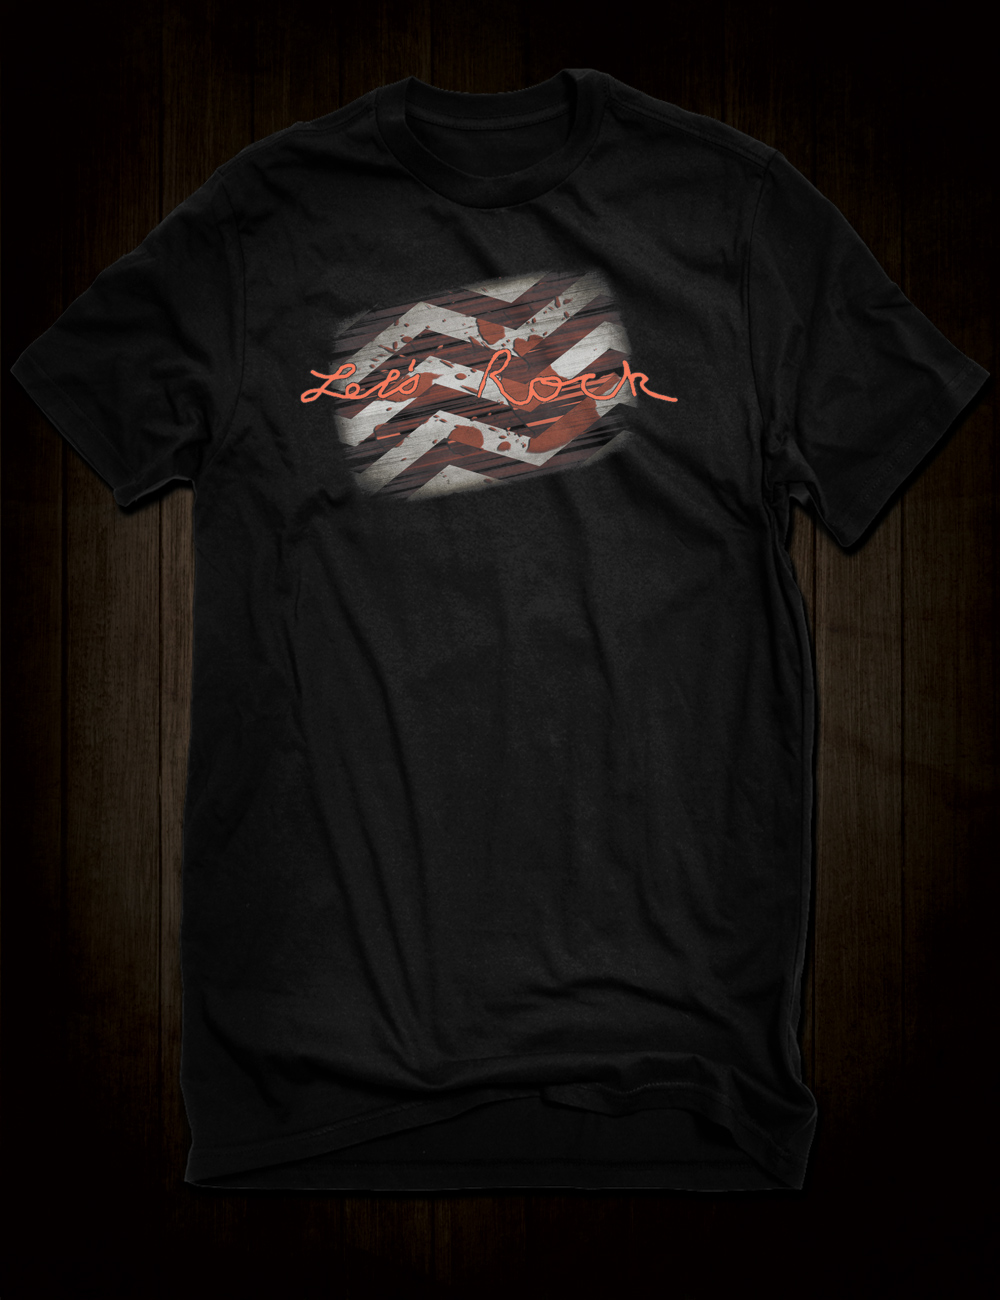 Fire Walk With Me - Let's Rock T-Shirt - Hellwood Outfitters